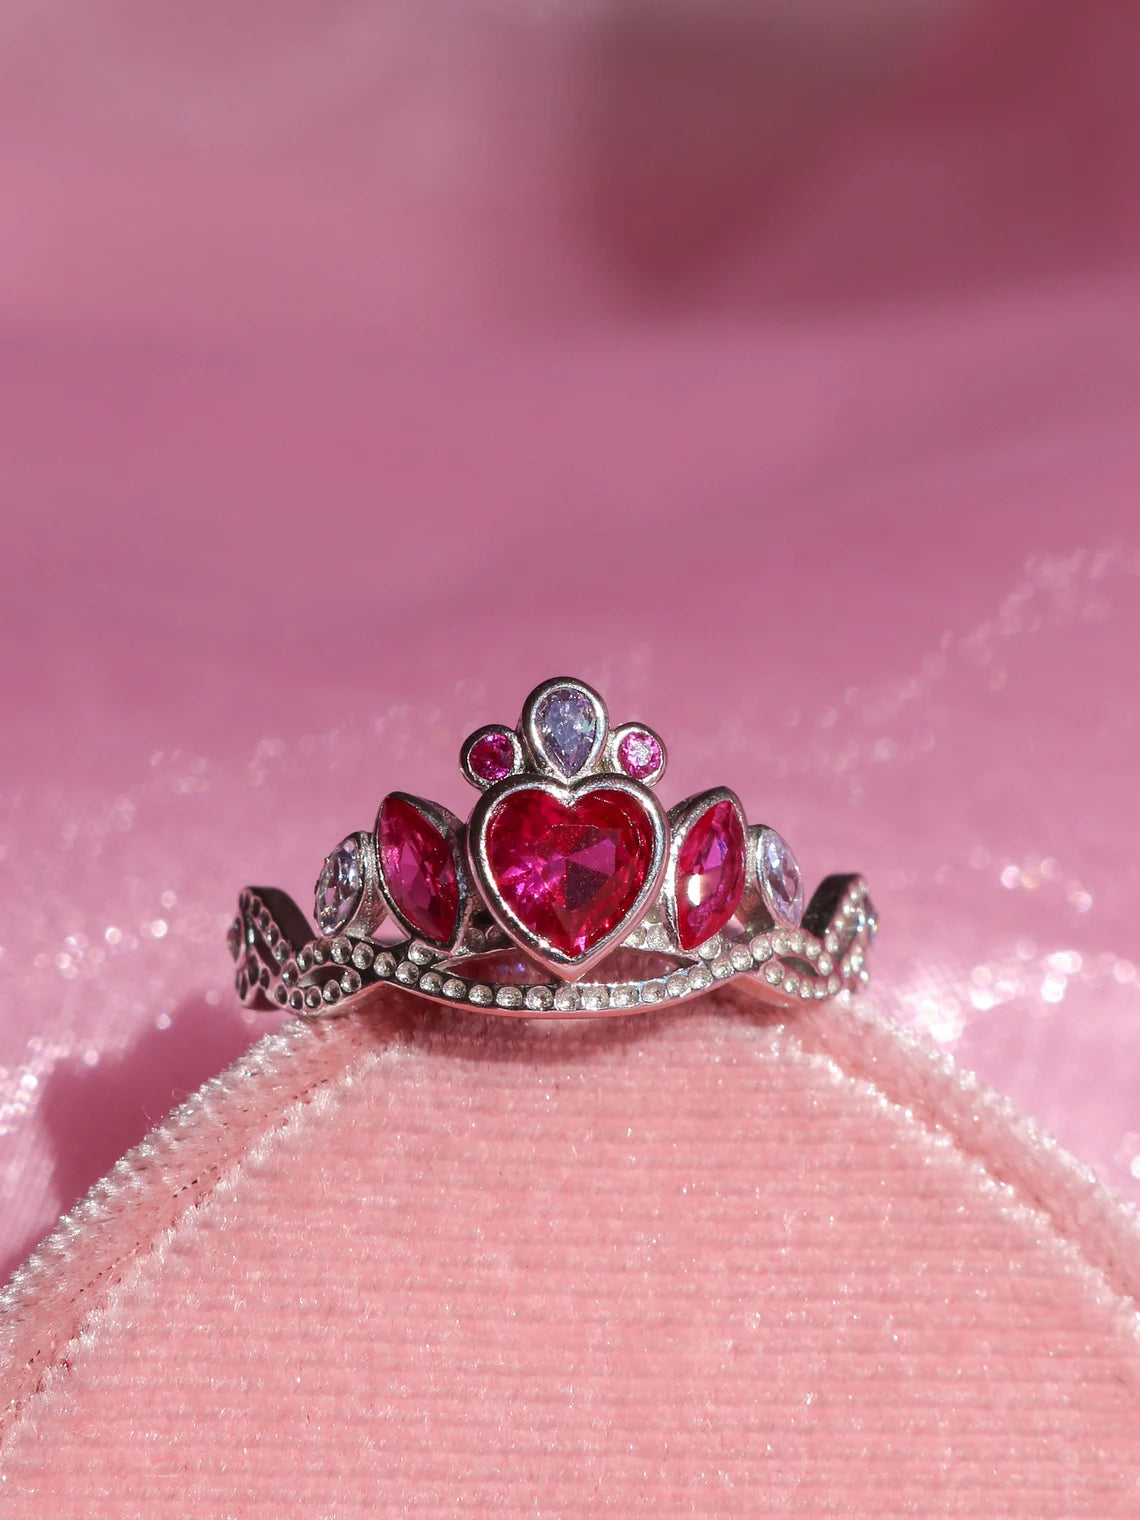 Buy Tangled Engagement Ring, Rapunzel Wedding Crown Ring, Rapunzel Tiara  Ring, Princess Tiara, Rapunzel Cosplay Online in India - Etsy